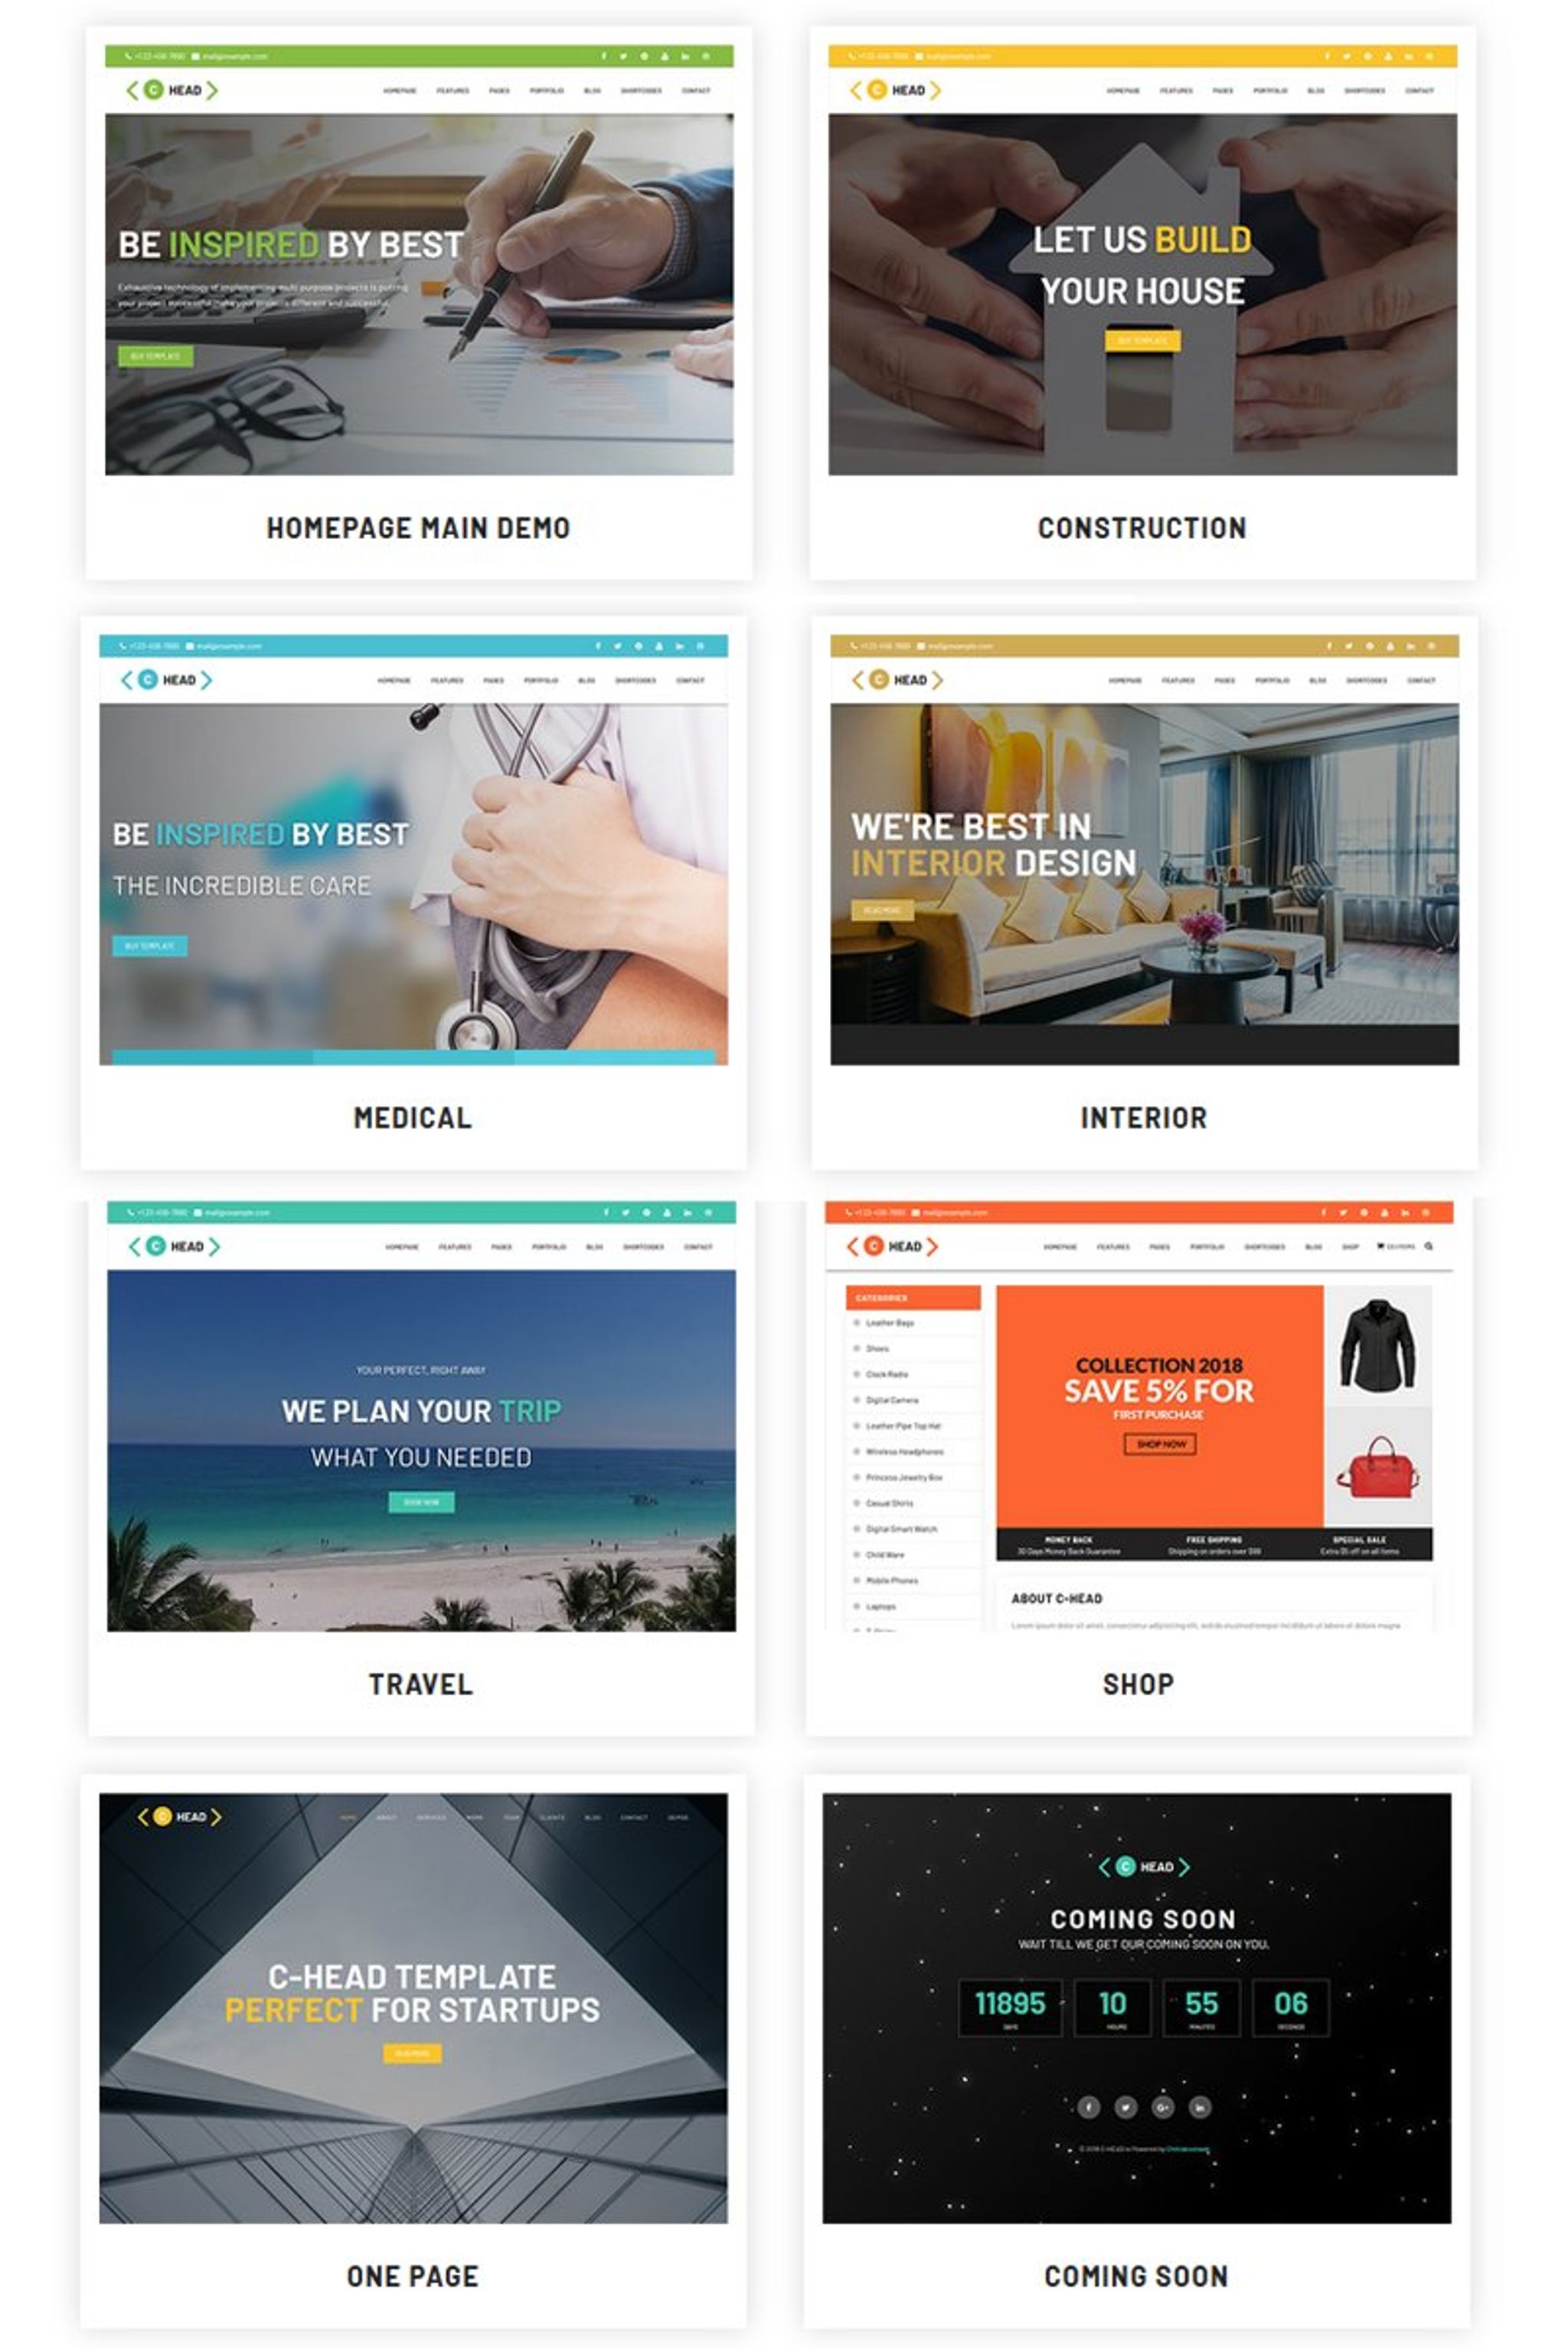 about us template for website download